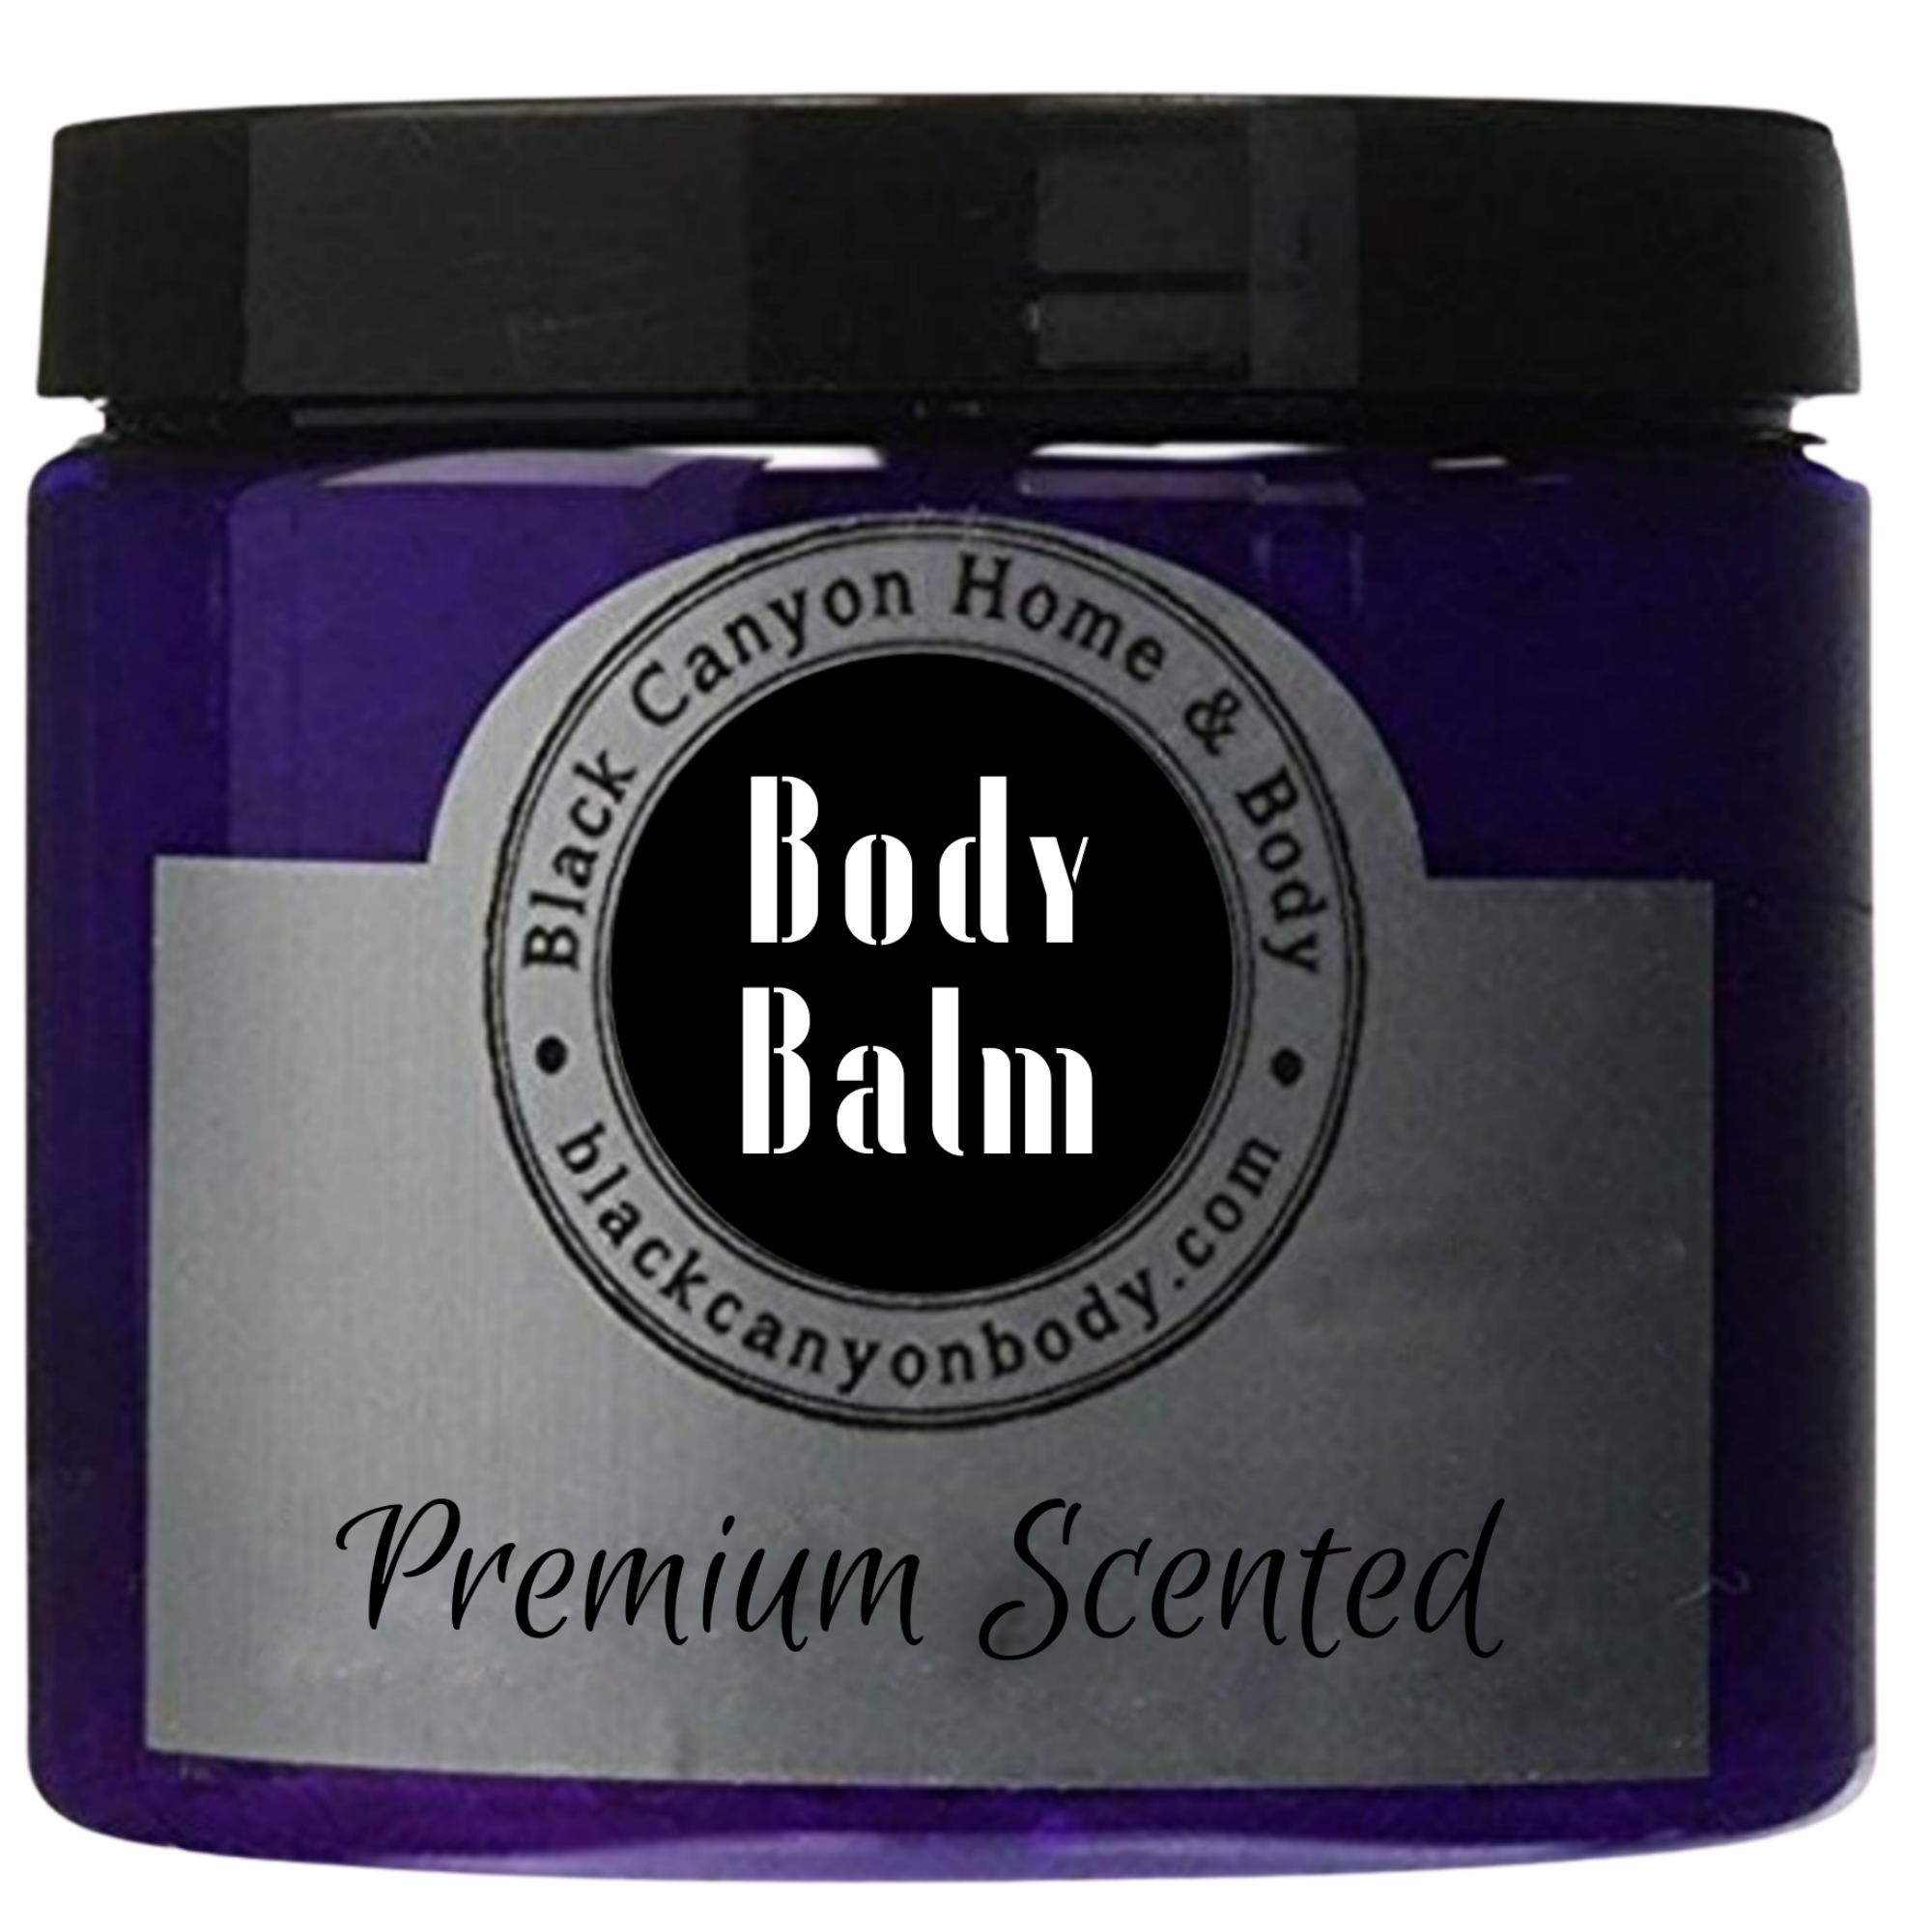 Black Canyon Heliotrope & Sandalwood Scented Natural Body Balm with Shea